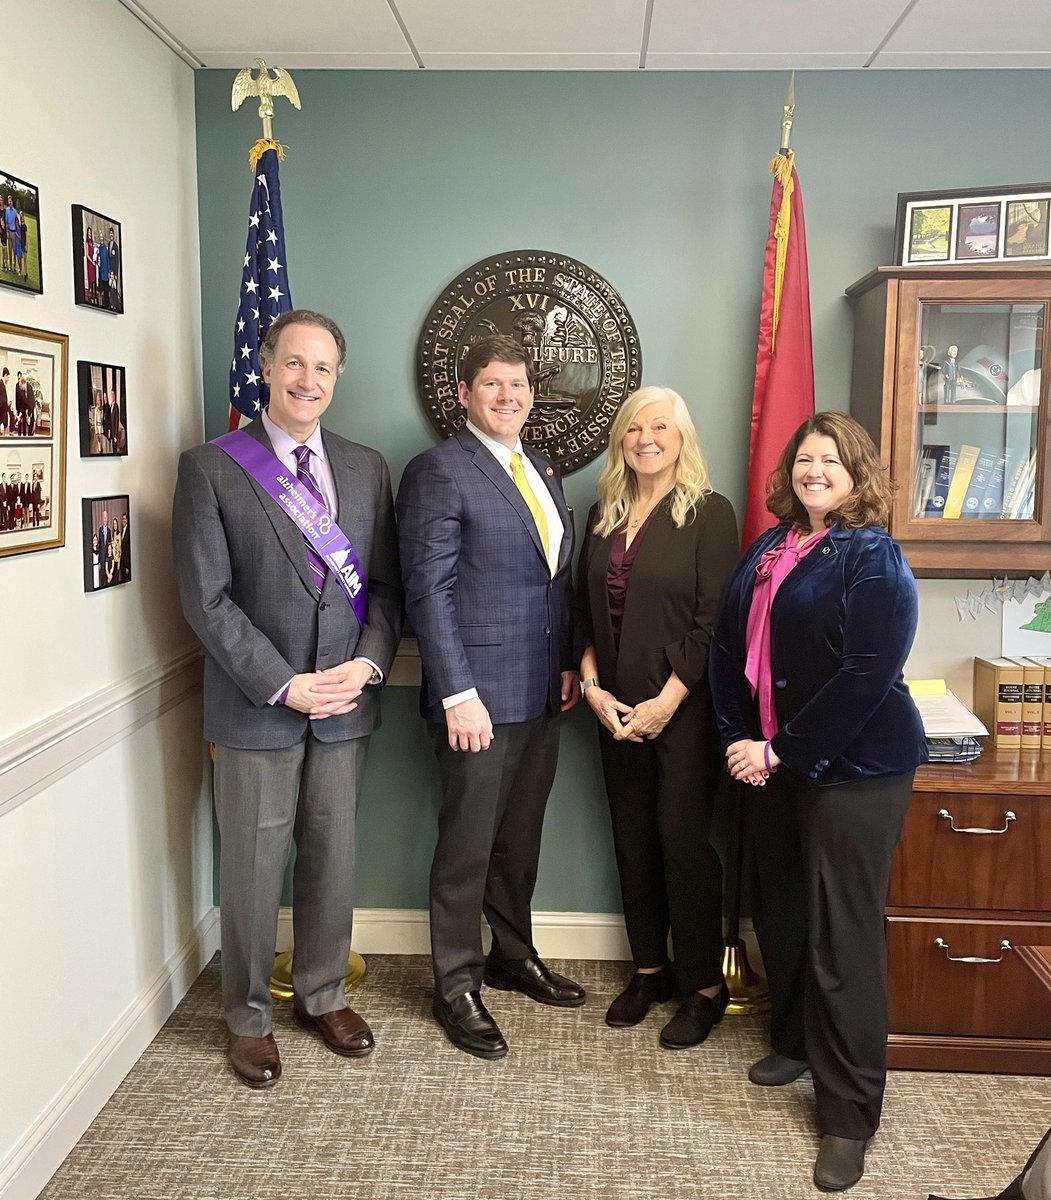 Many thanks again to Rep. @VoteBobFreeman for co-sponsoring & meeting today to discuss the funding support needed for the TN respite care bill HB1686!  #ColThomasBowdenAct  #ENDALZ #ALZDayontheHill22 @endalztn @ALZIMPACT